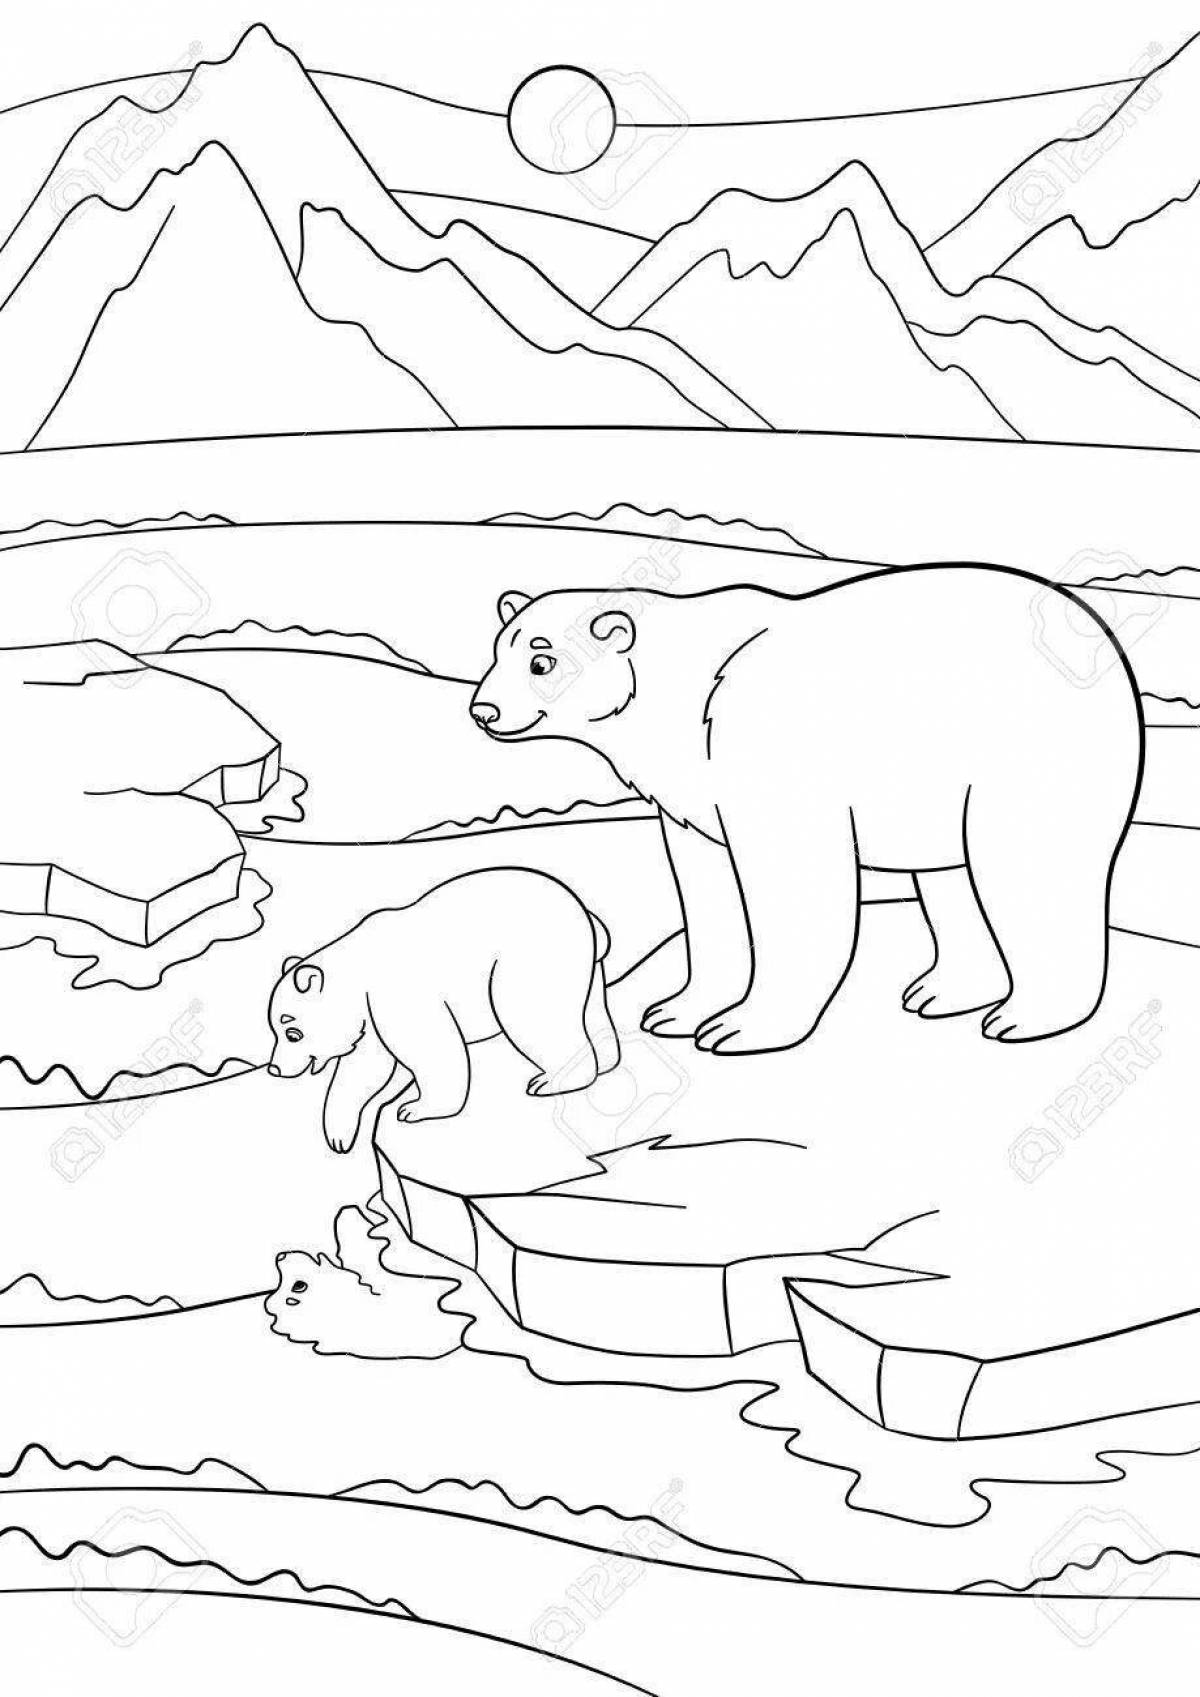 Colourful arctic coloring book for kids